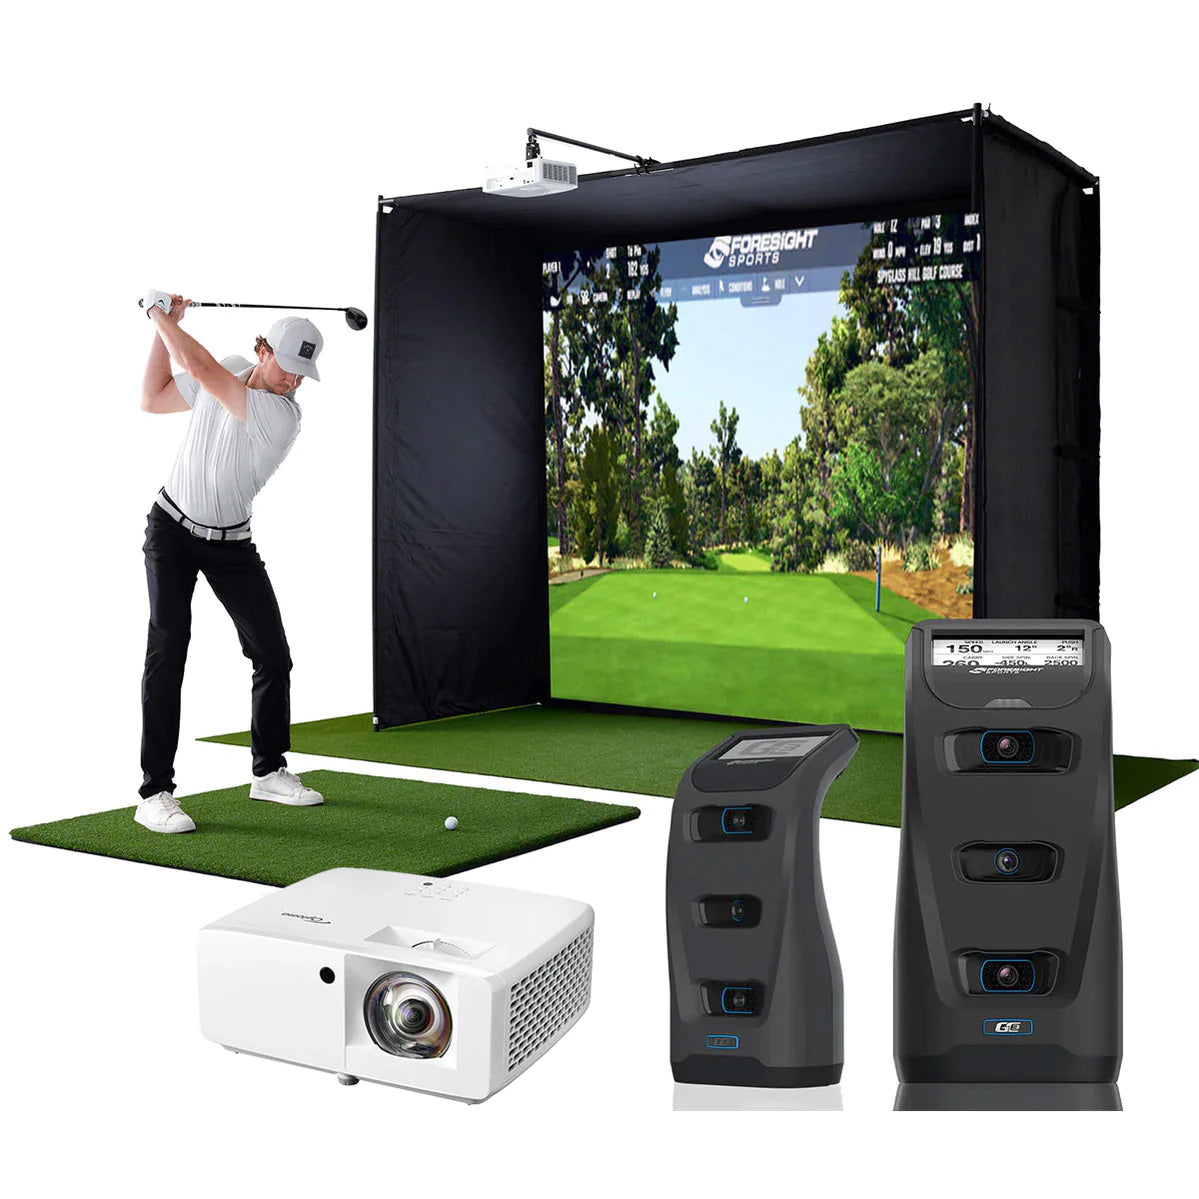 The Foresight Sports GC3 next to a projector with a golfer and PlayBetter SimStudio package in the background